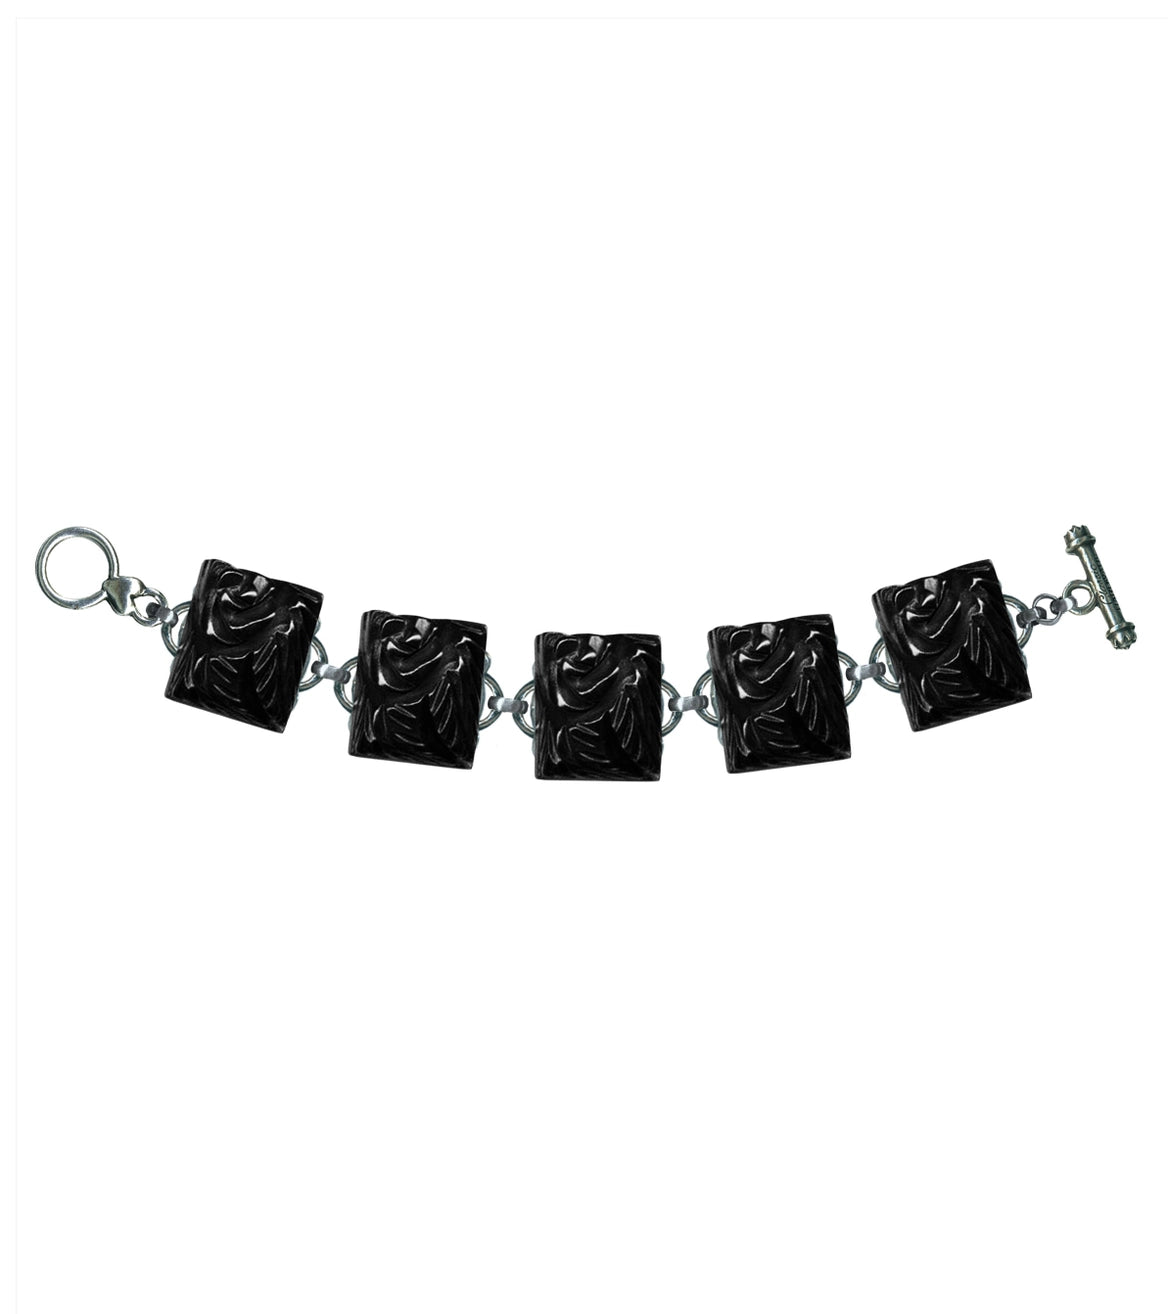 silver plated toggle closure bracelet with a single row of rectangular black floral charms made of durable hand poured poly resin made to mimic vintage Bakelite